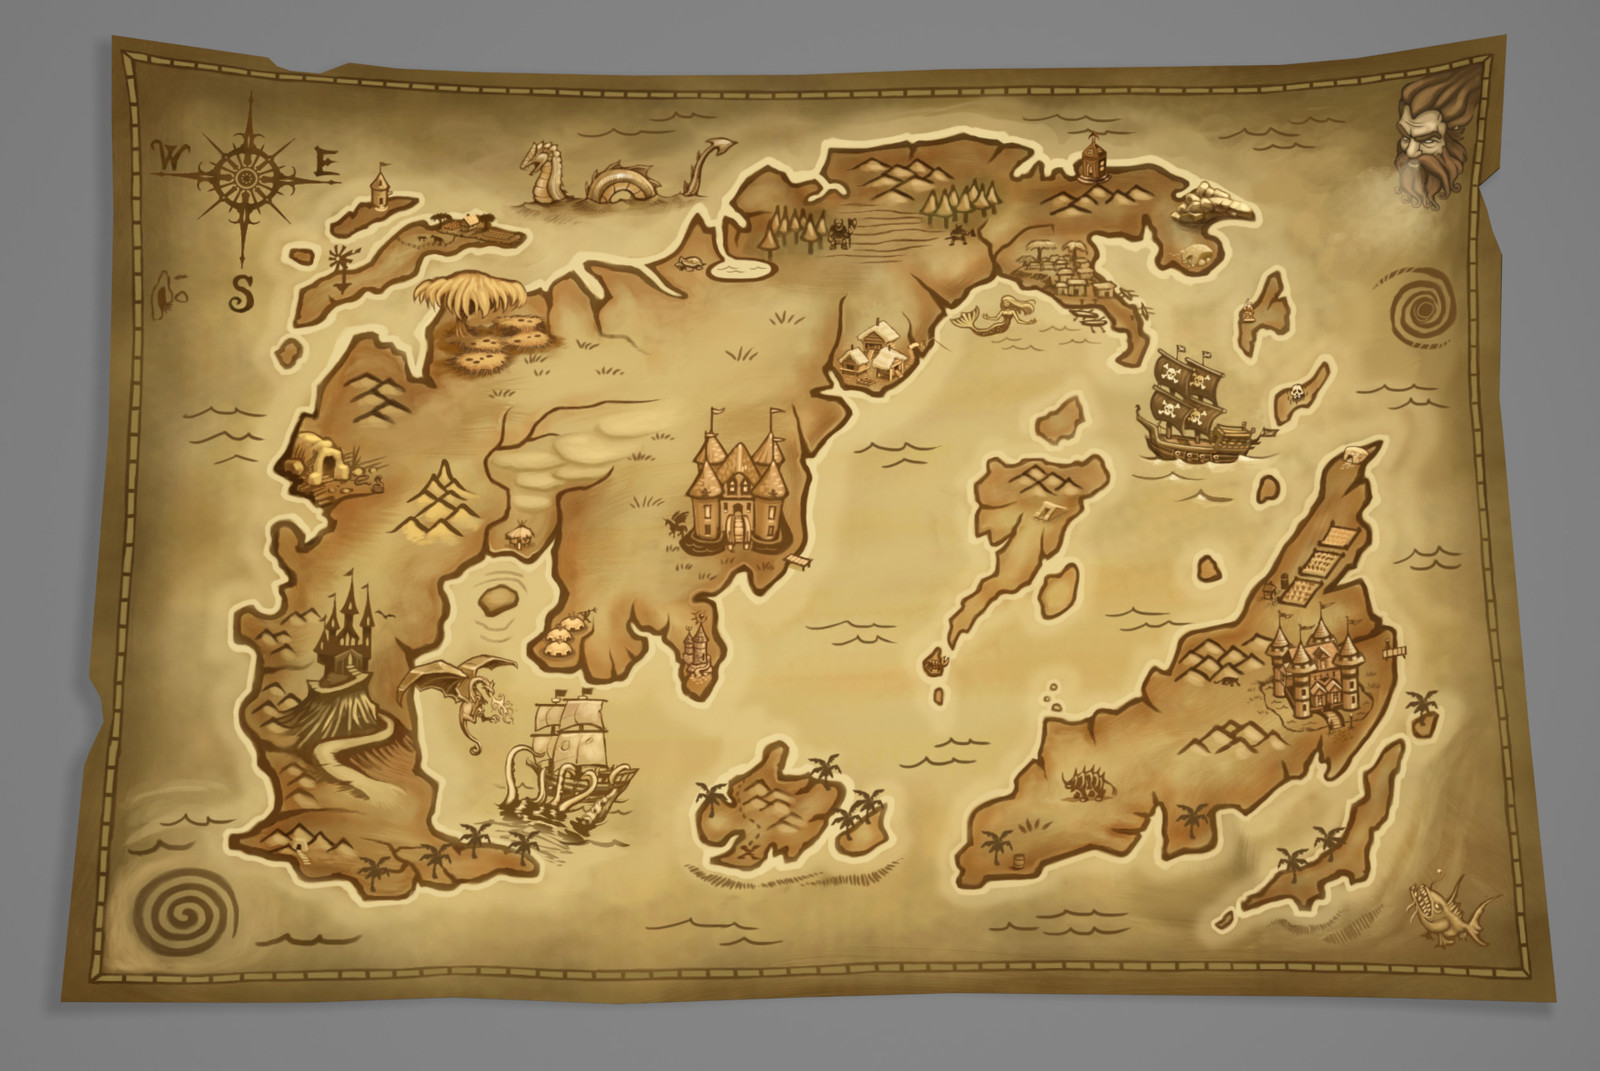 Old-style map fun. I love those old sepia-toned maps where people barely understood the world they were exploring.